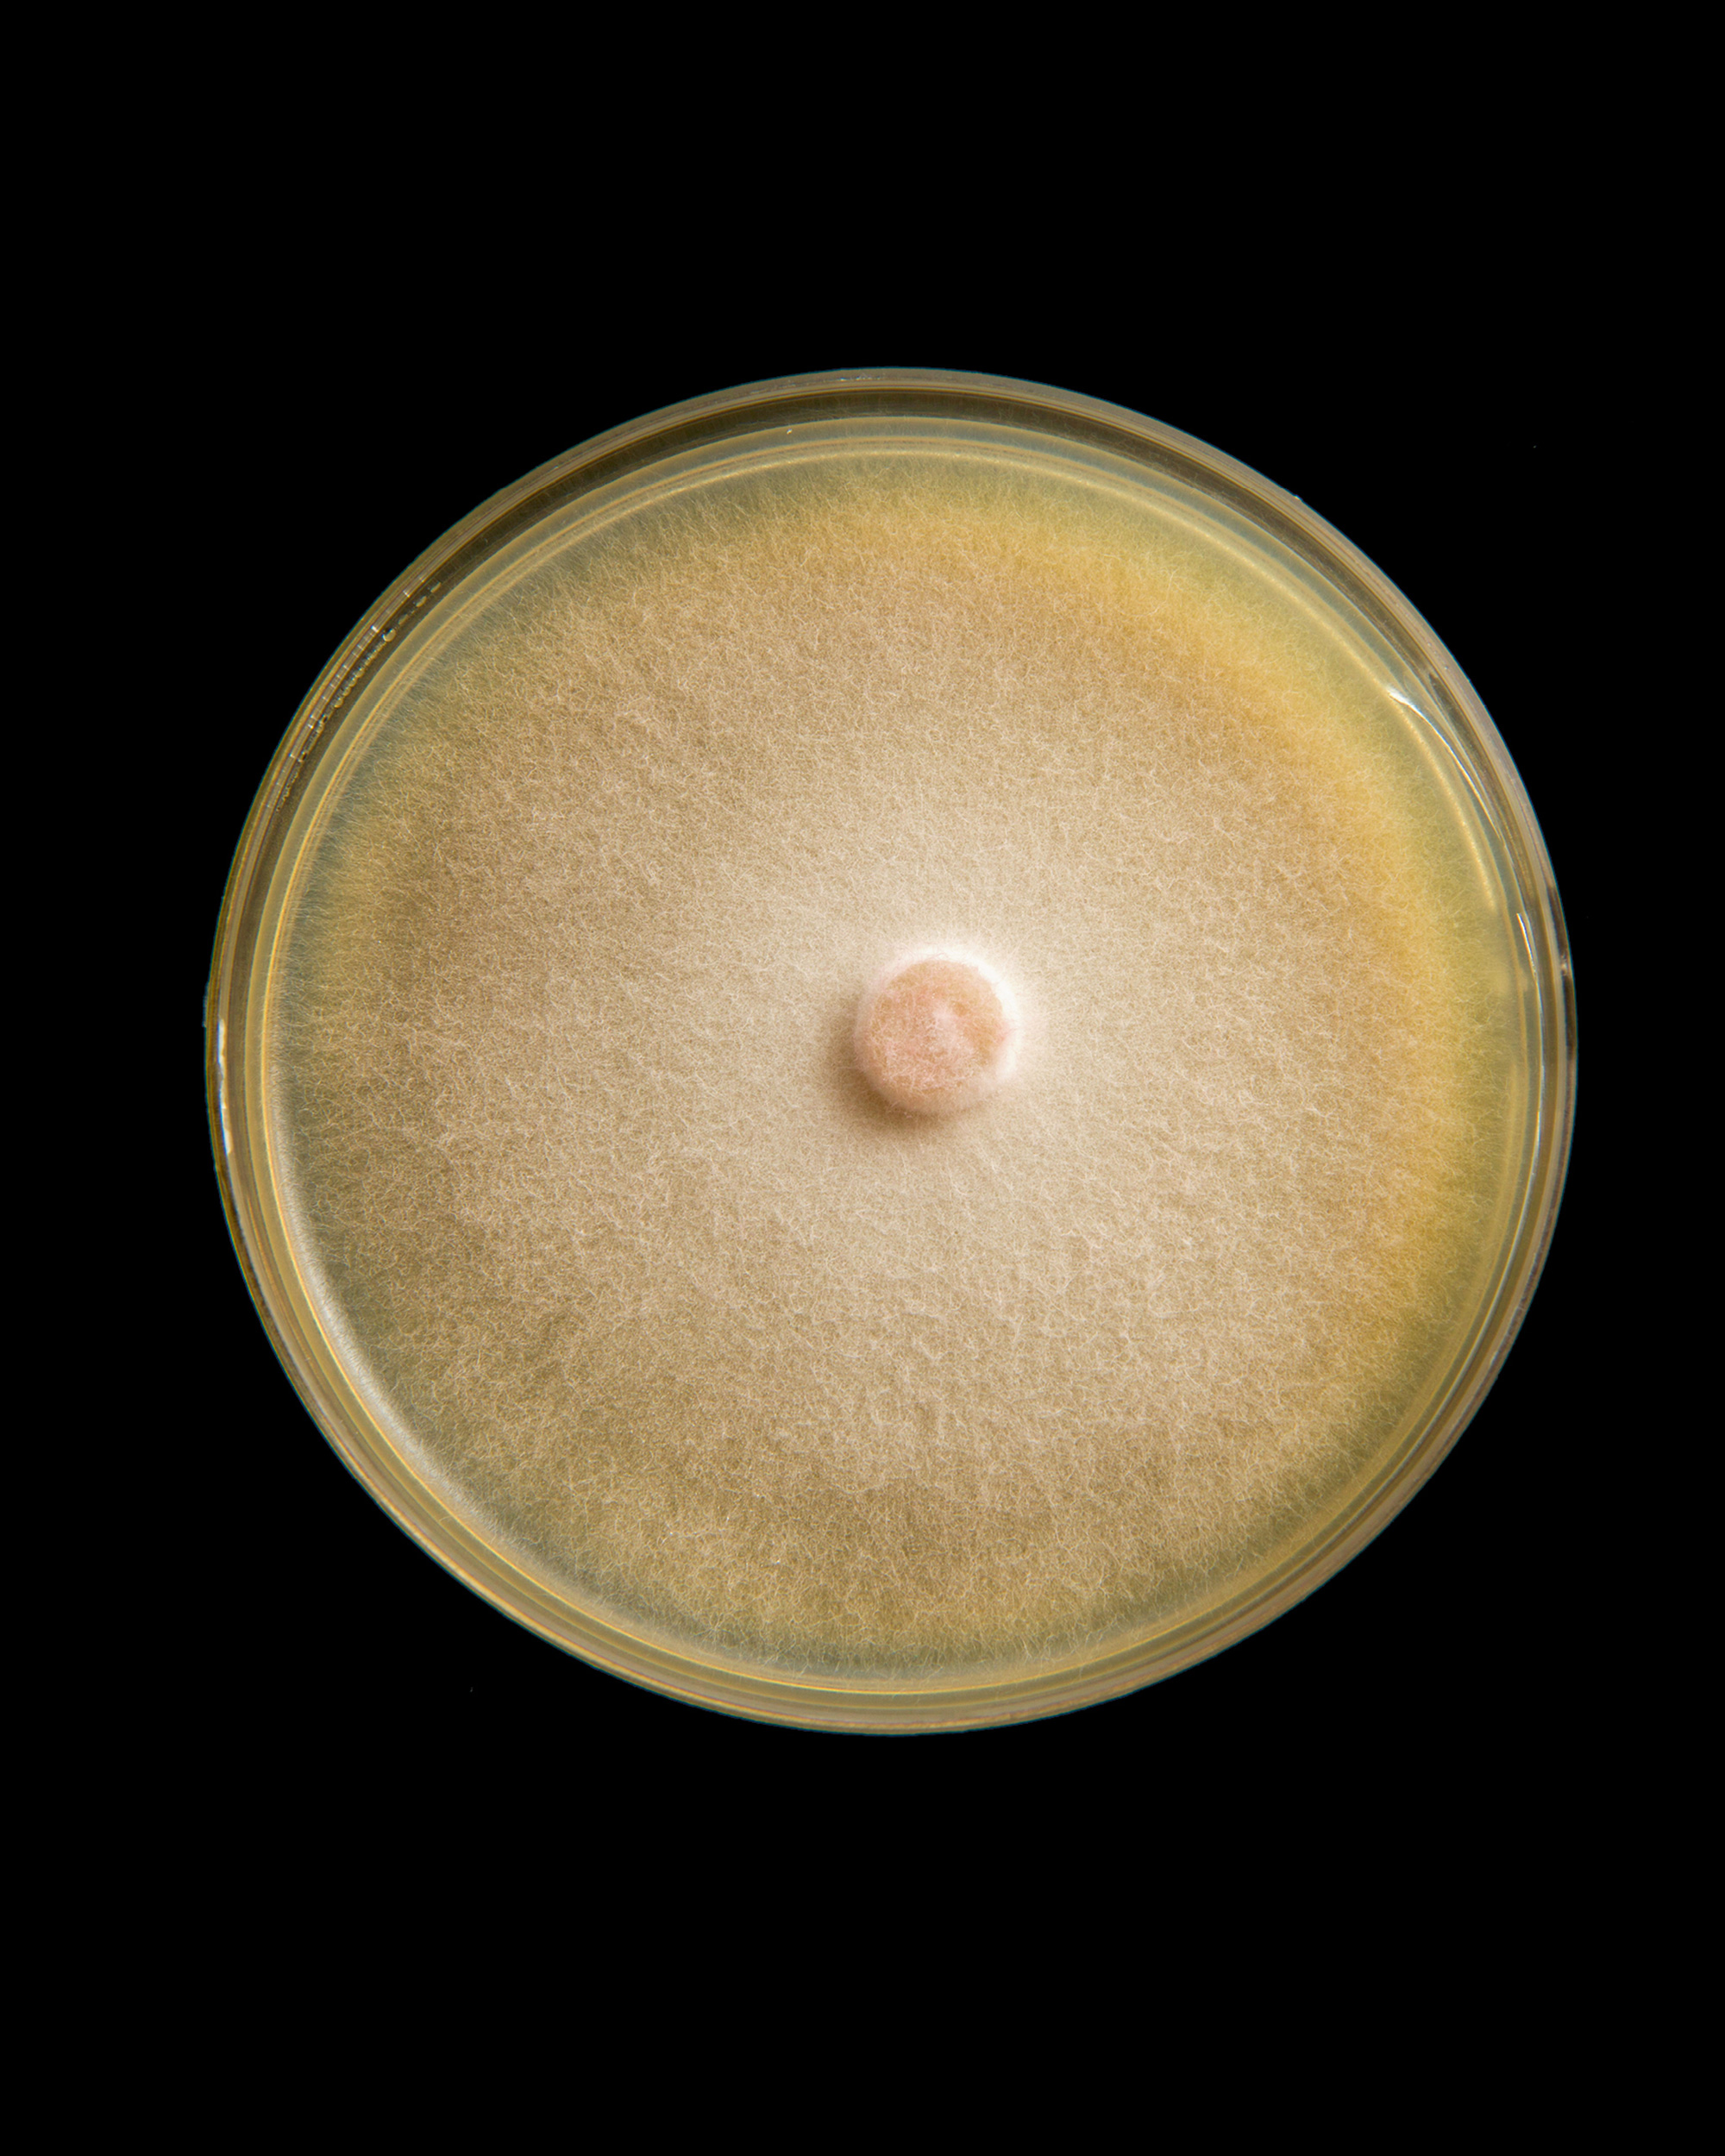 Alessandro Grandini’s photograph of a petri dish containing Fusarium oxysporum, which causes disease among a variety of hosts, including potato and sugar cane. 